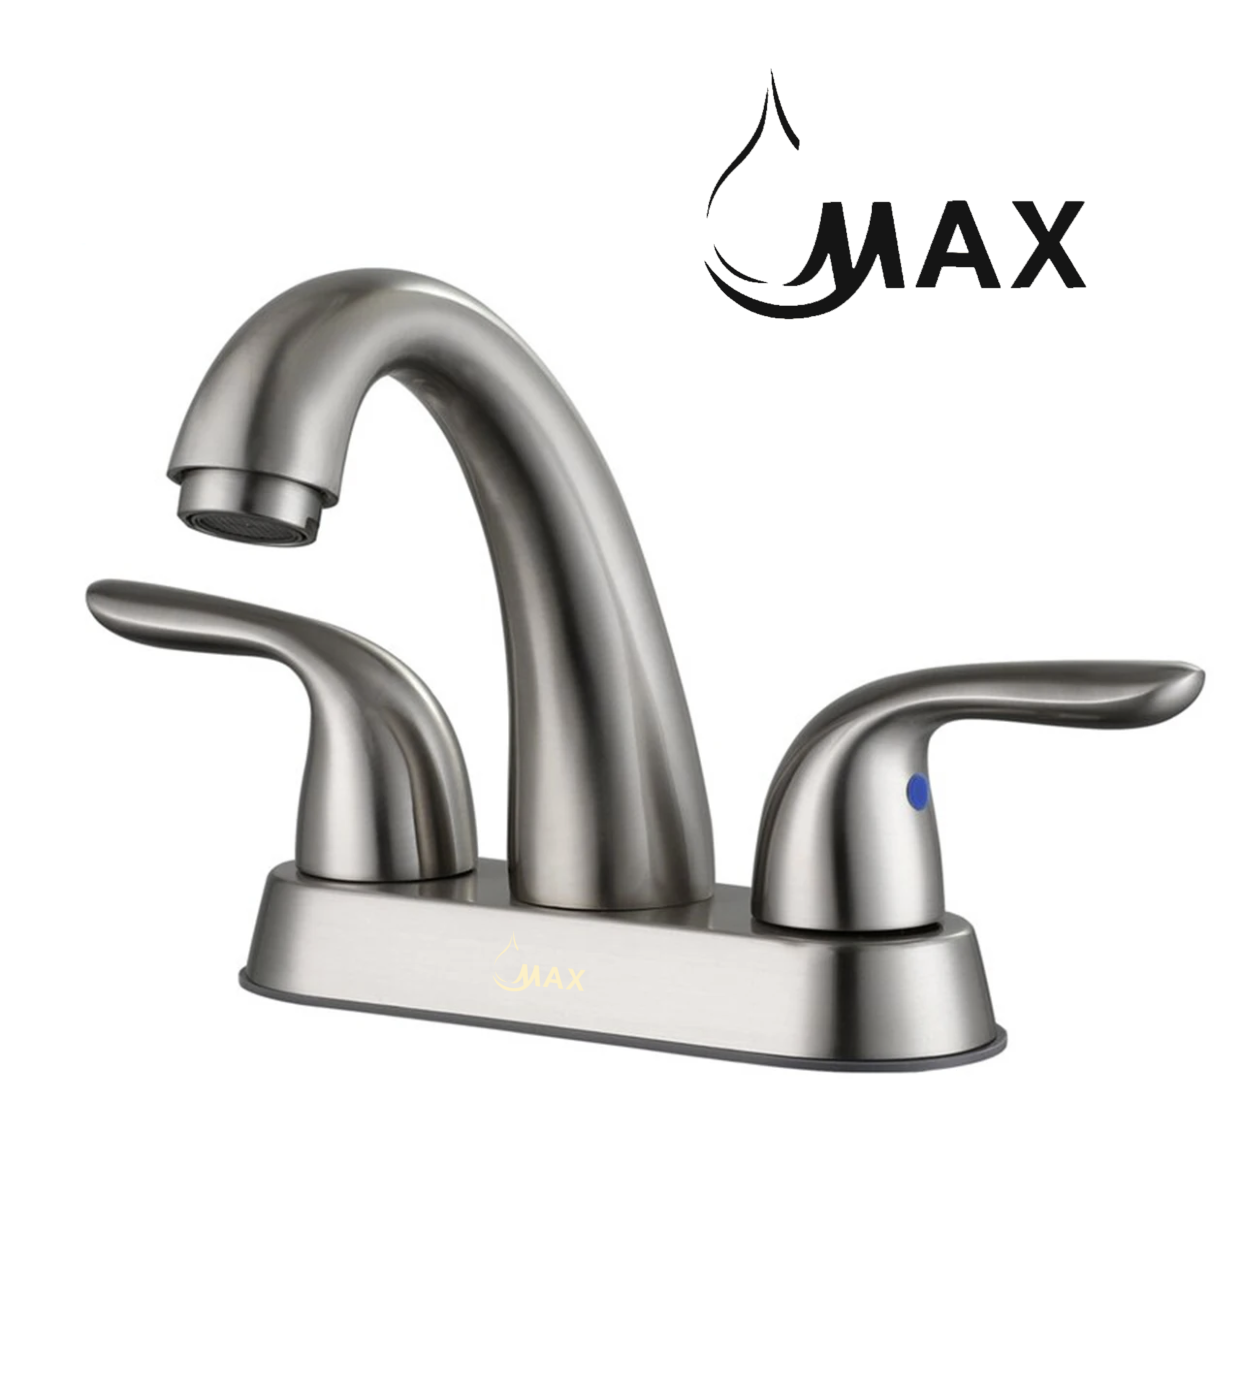 Bathroom Faucet Two Handle Commercial Widespread Brushed Nickel